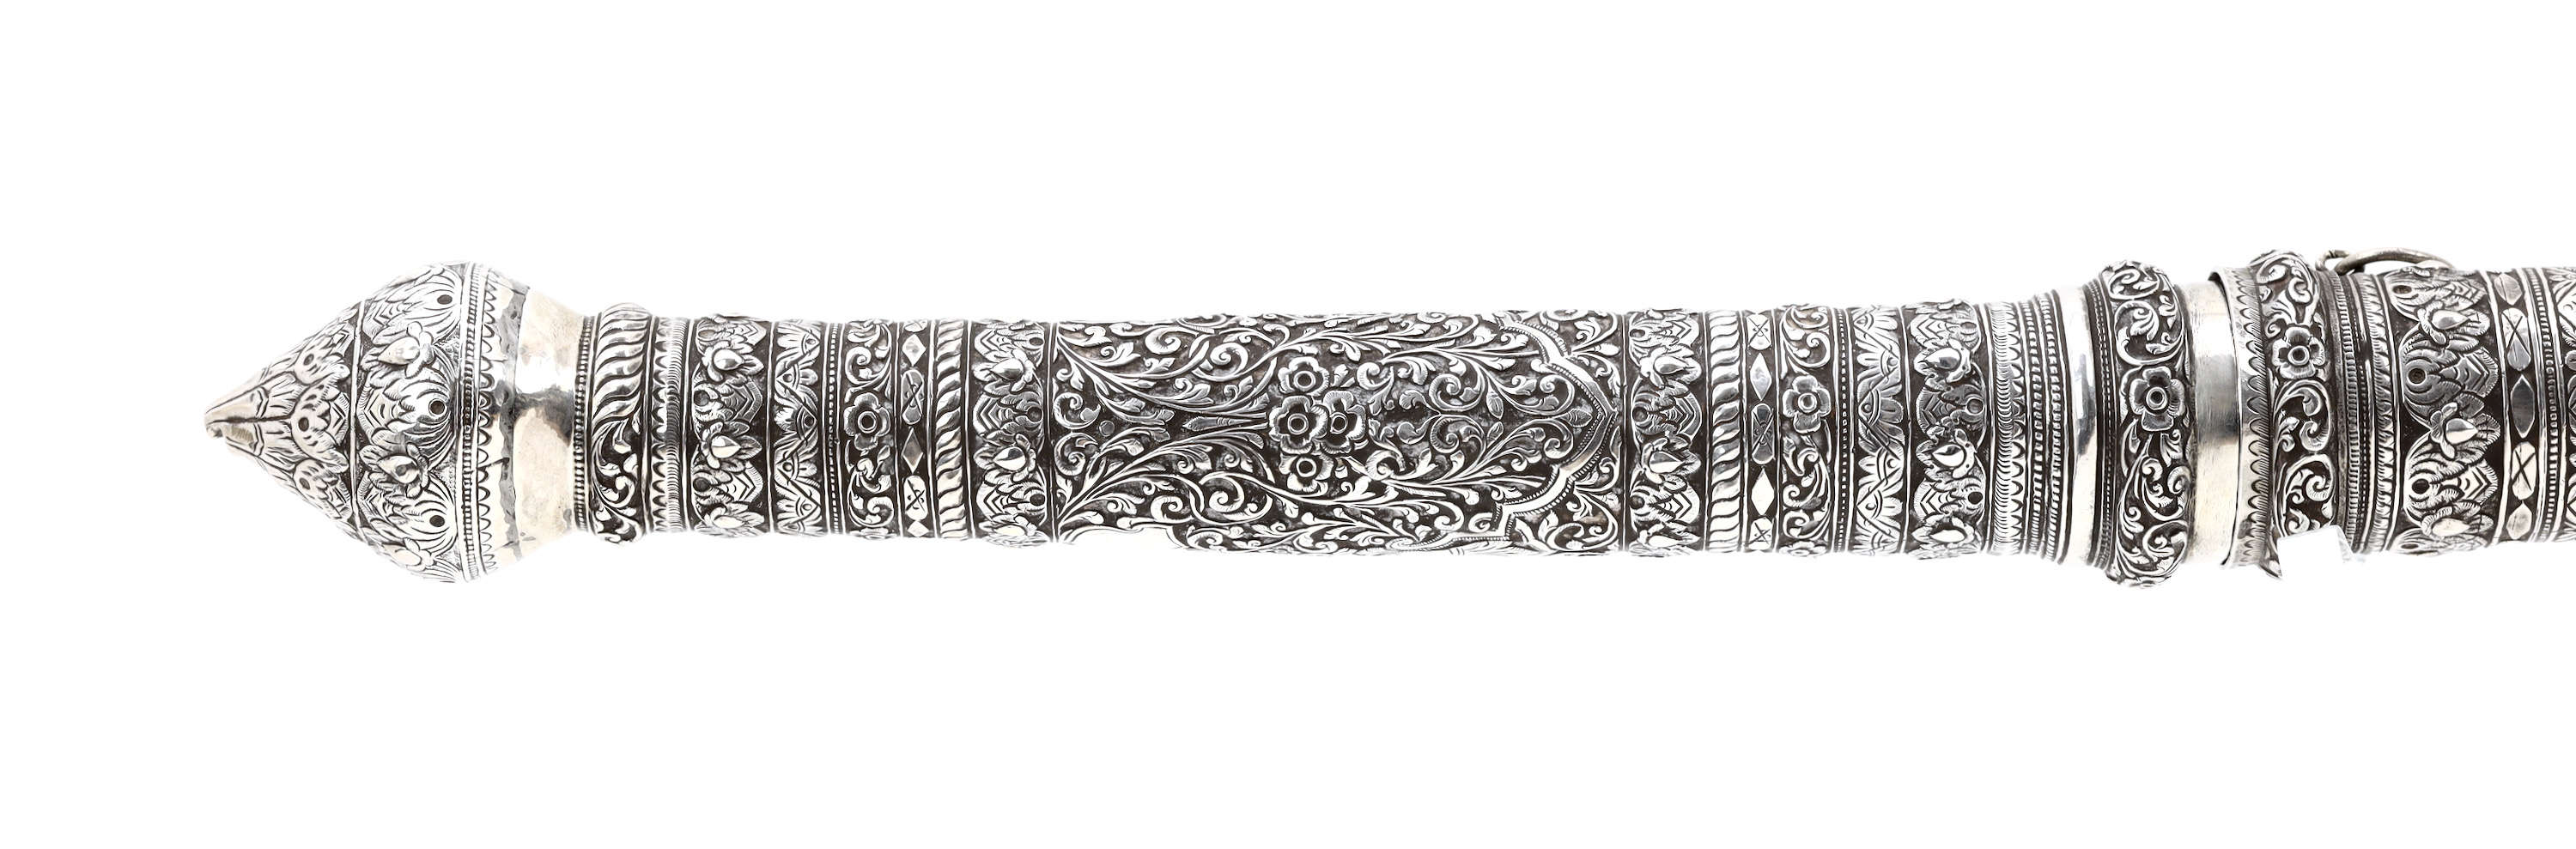 Fine silver dha with Mindan blade owned by O.T. Burne